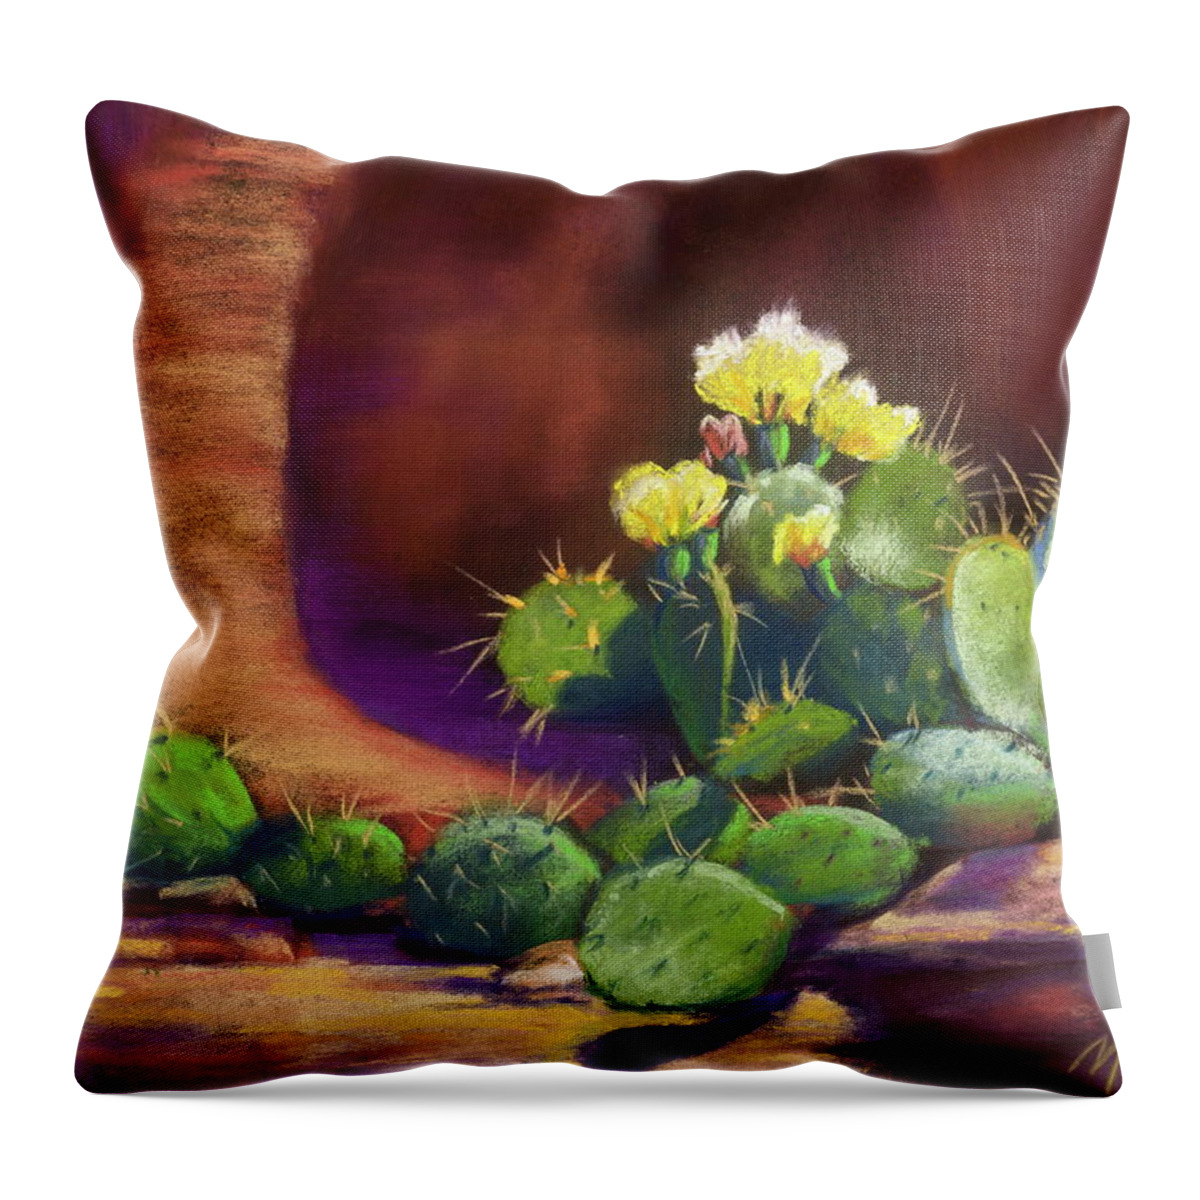 Landscape Throw Pillow featuring the painting Pricklies on a Ledge by Marjie Eakin-Petty